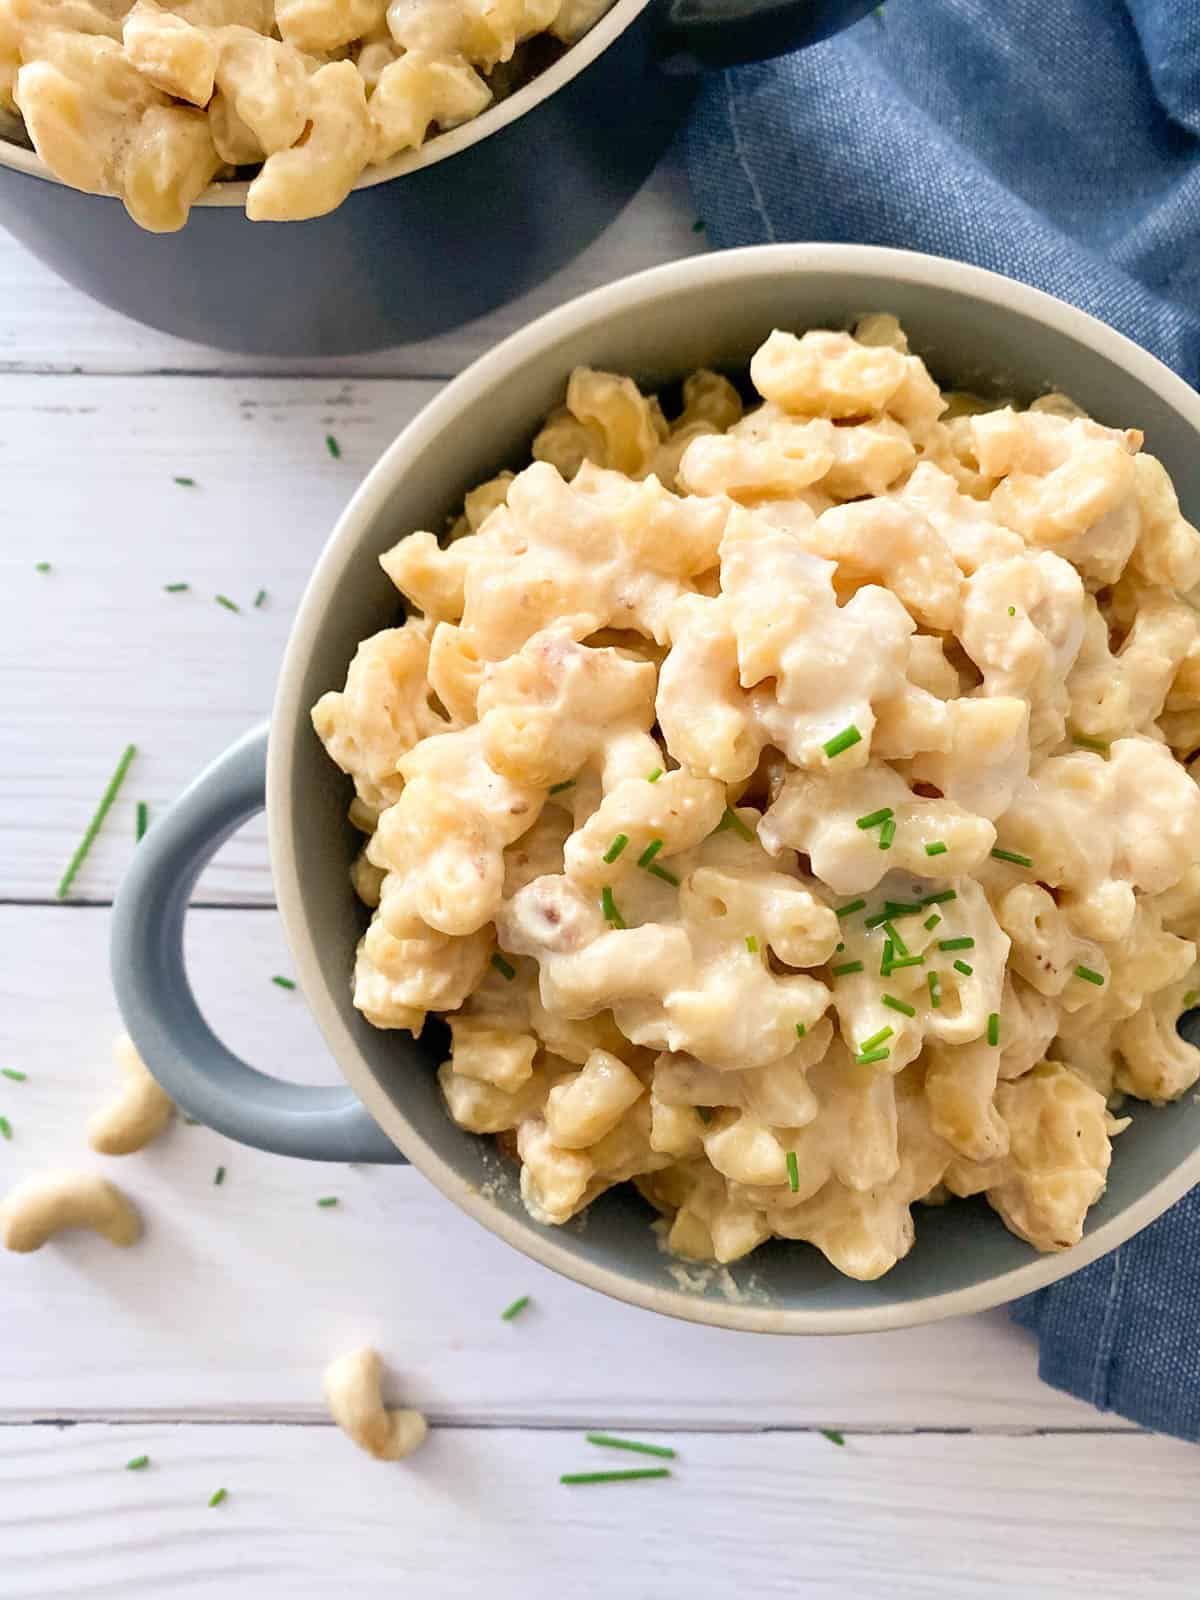 vegan mac and cheese in blue bowl with chives garnished on top.